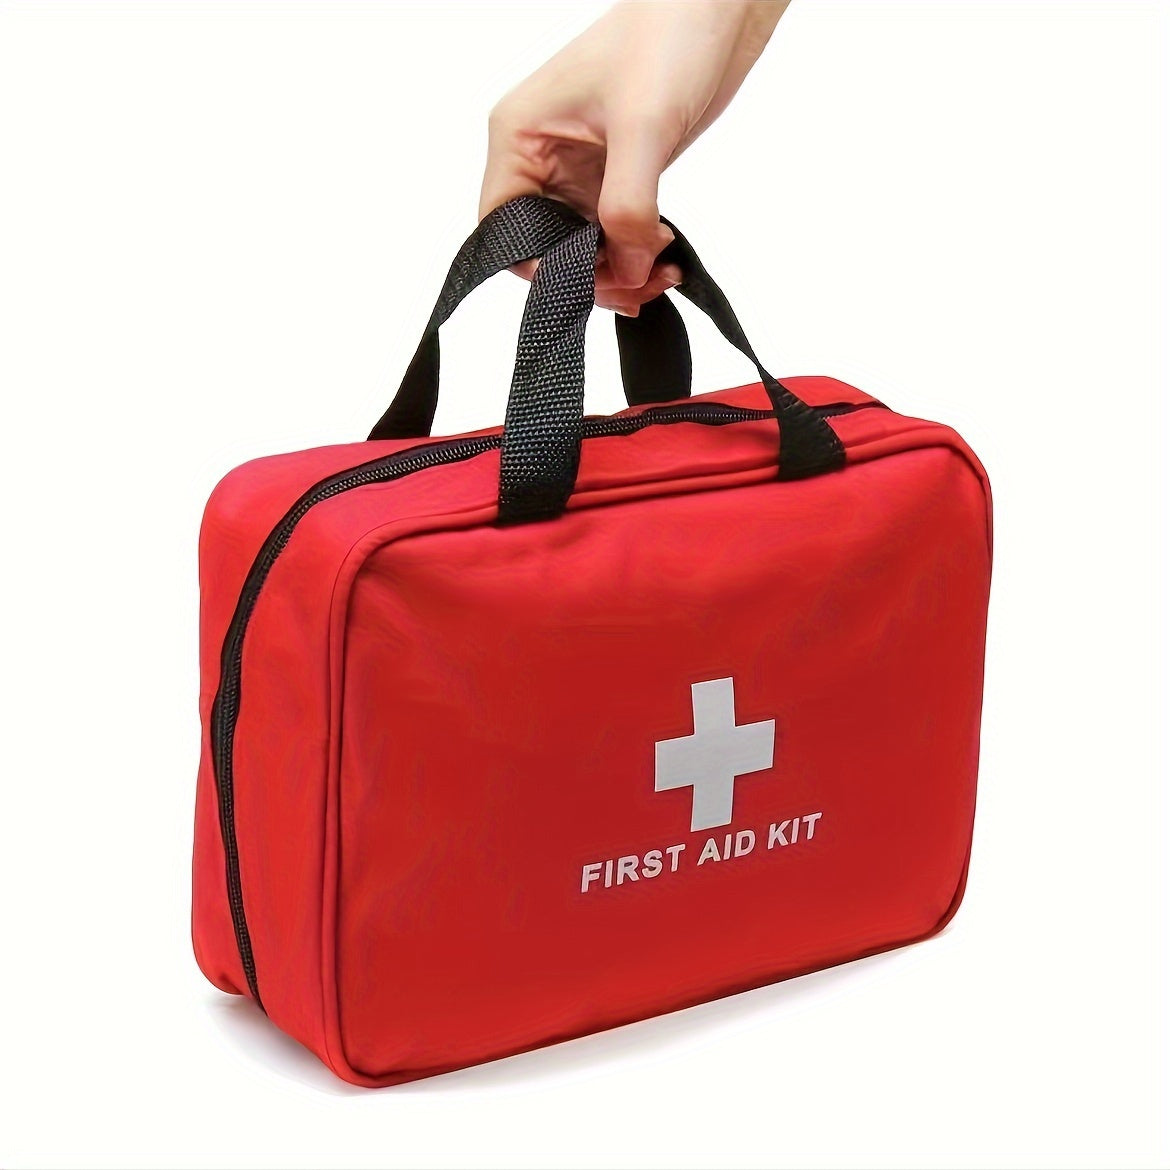 Red Large First Aid Kits: Portable Medical Kits for Hiking, Camping & Home